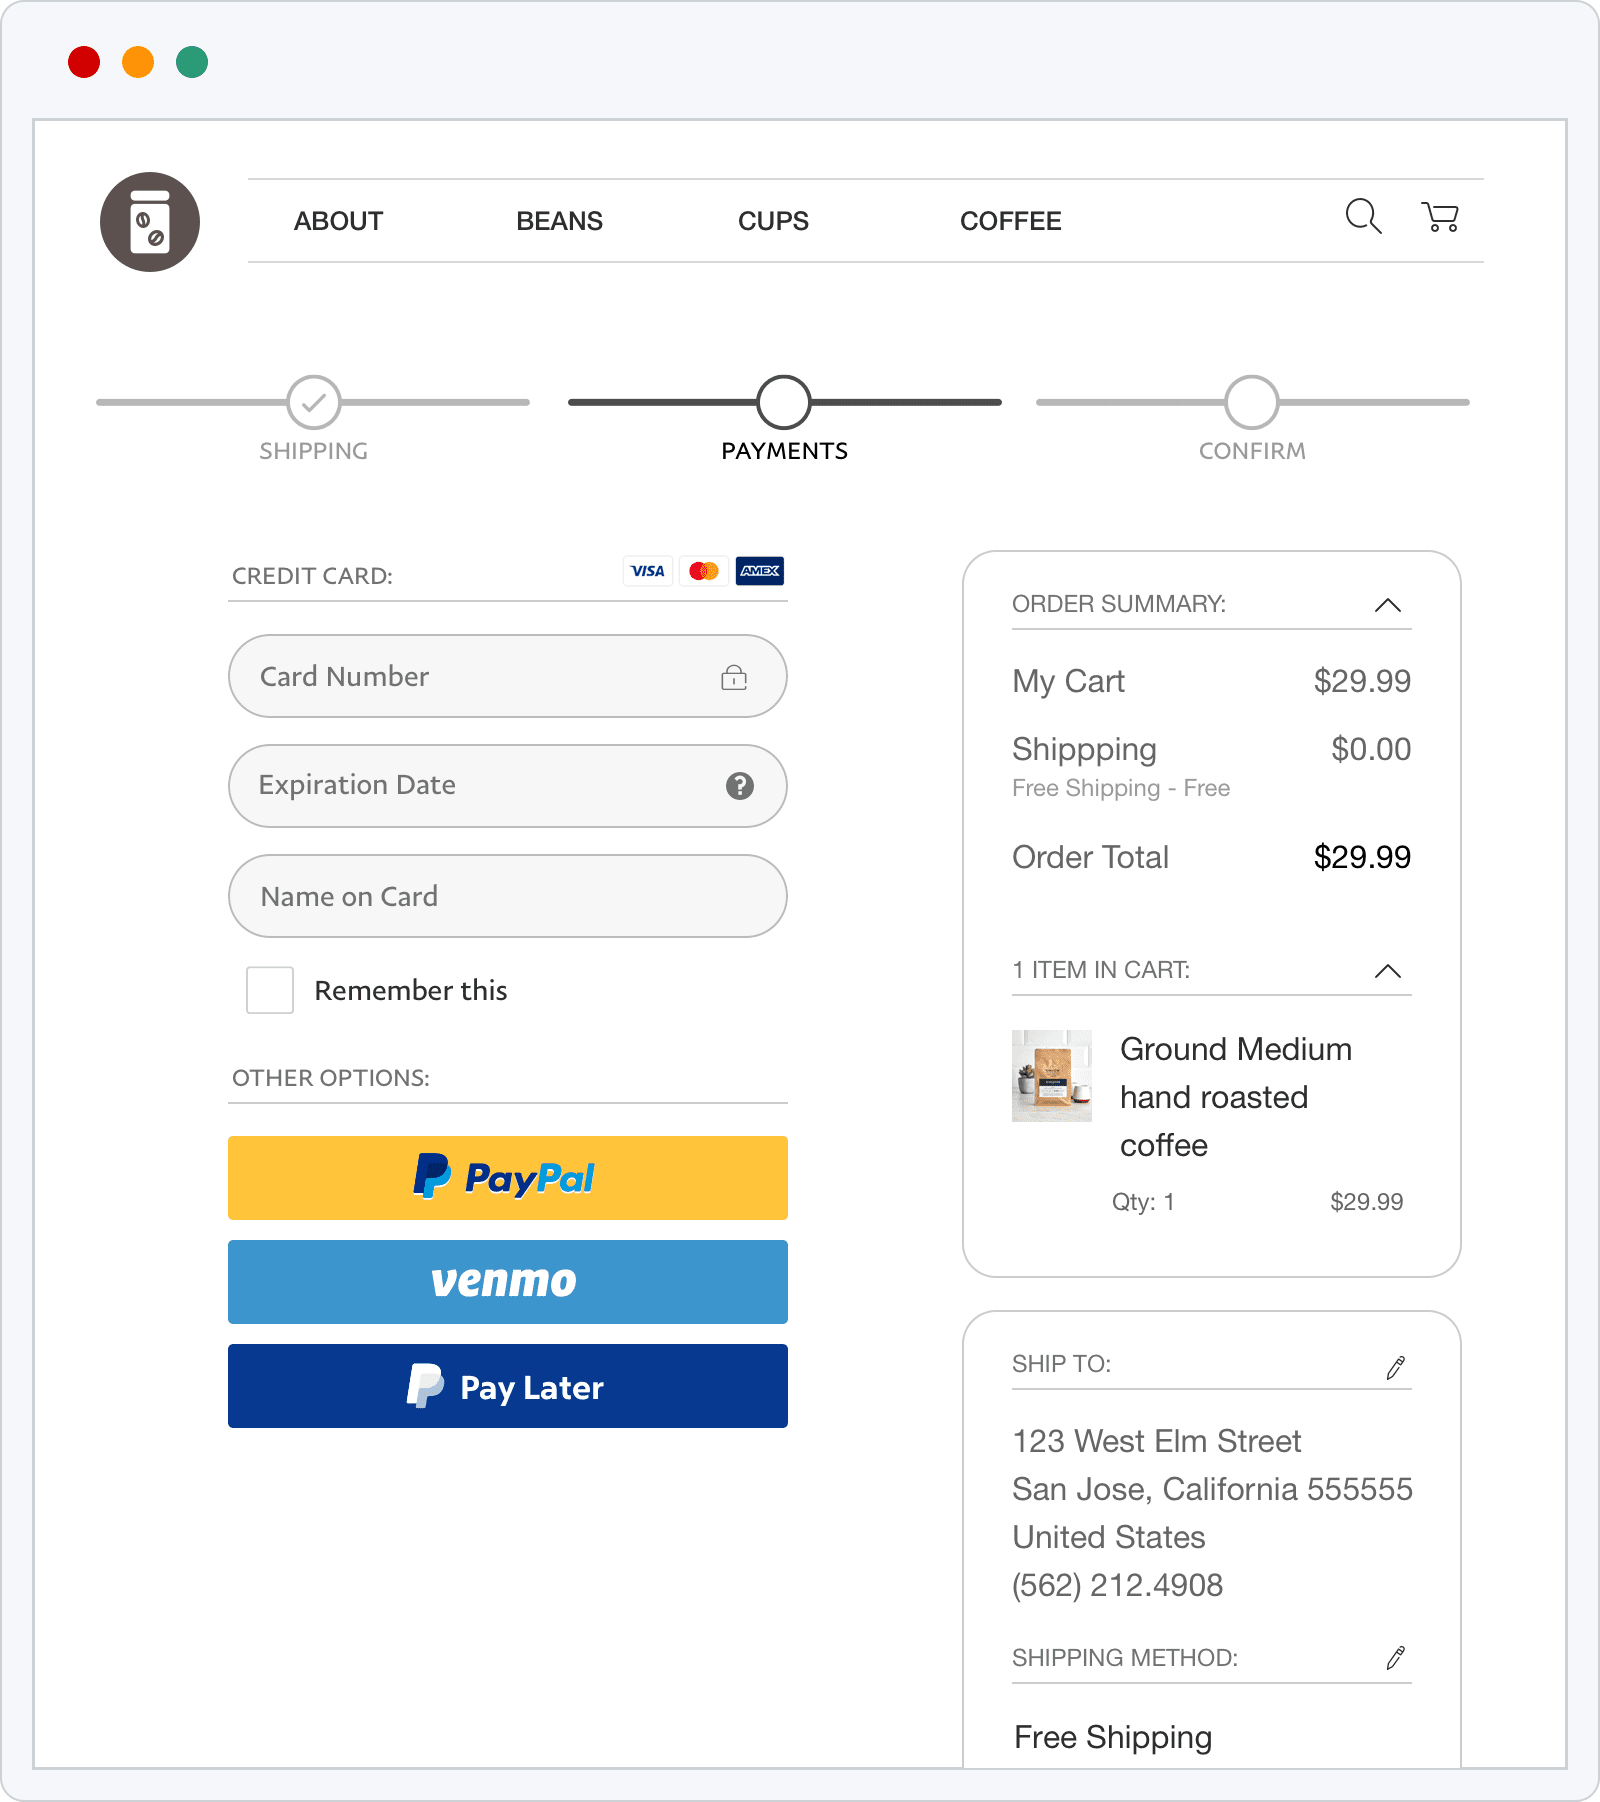 paypal money adder android app